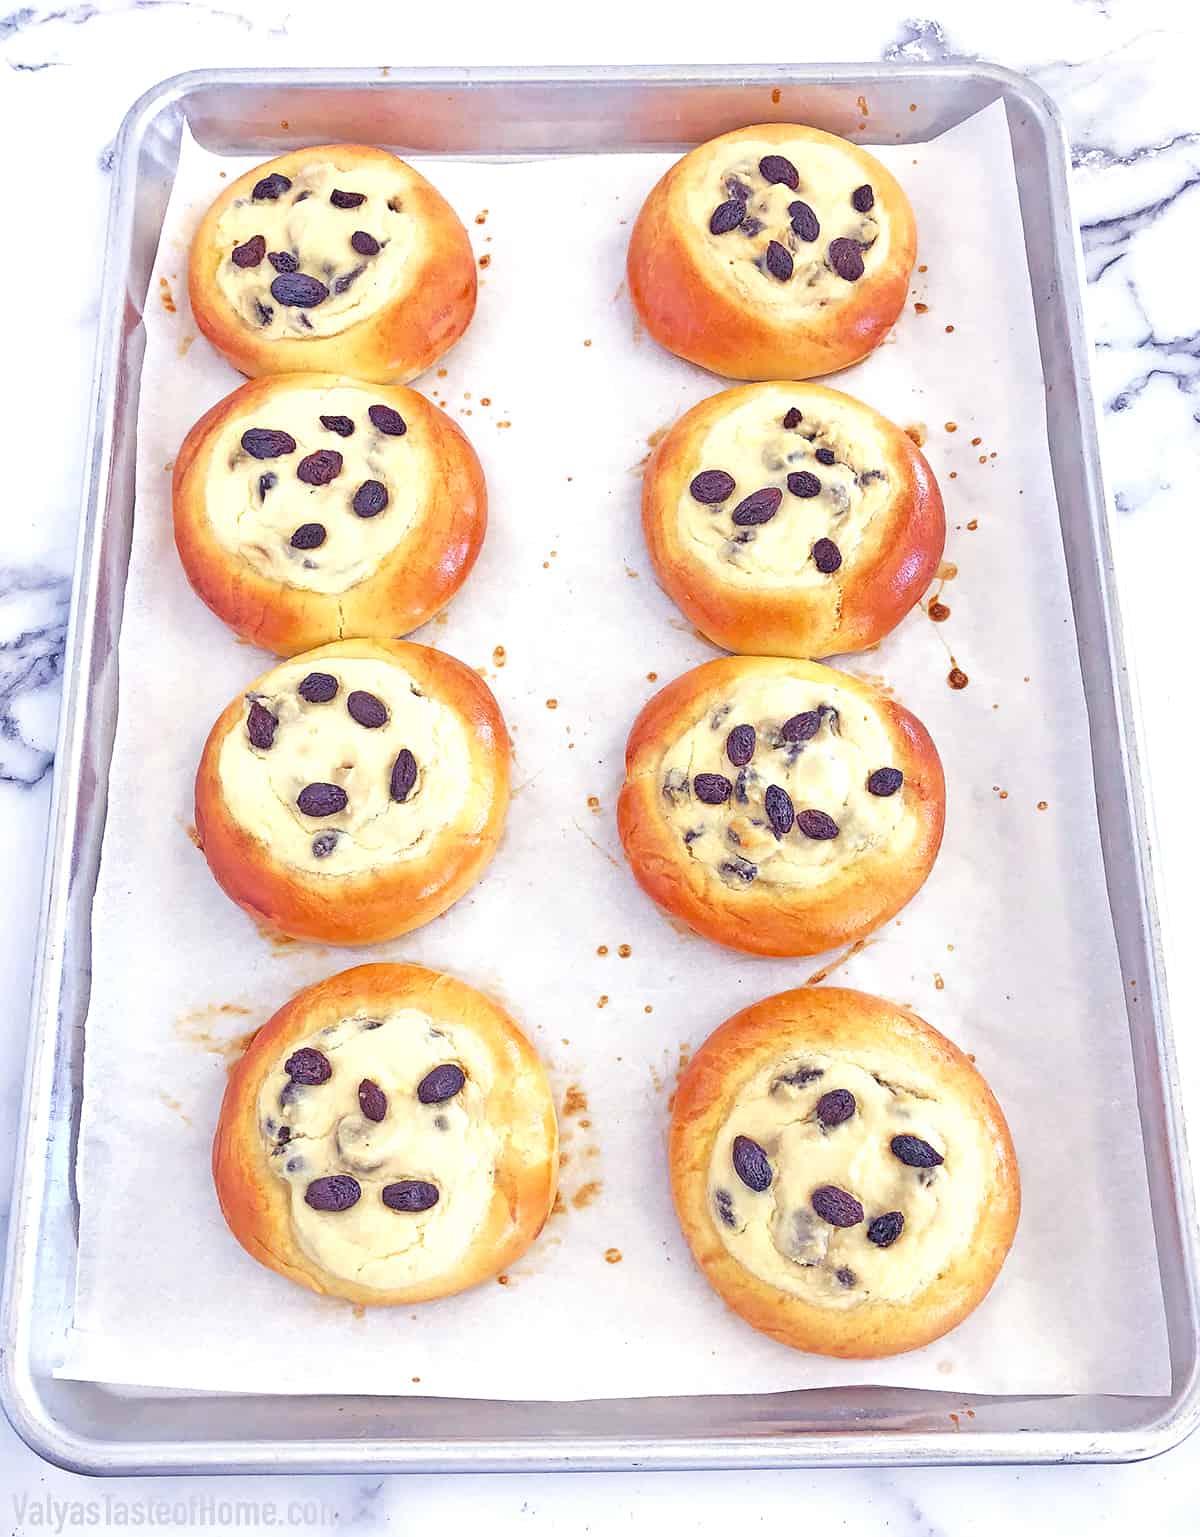 Bake the buns in the oven for 20 - 25 minutes or until the edges of the buns turn golden brown in color.